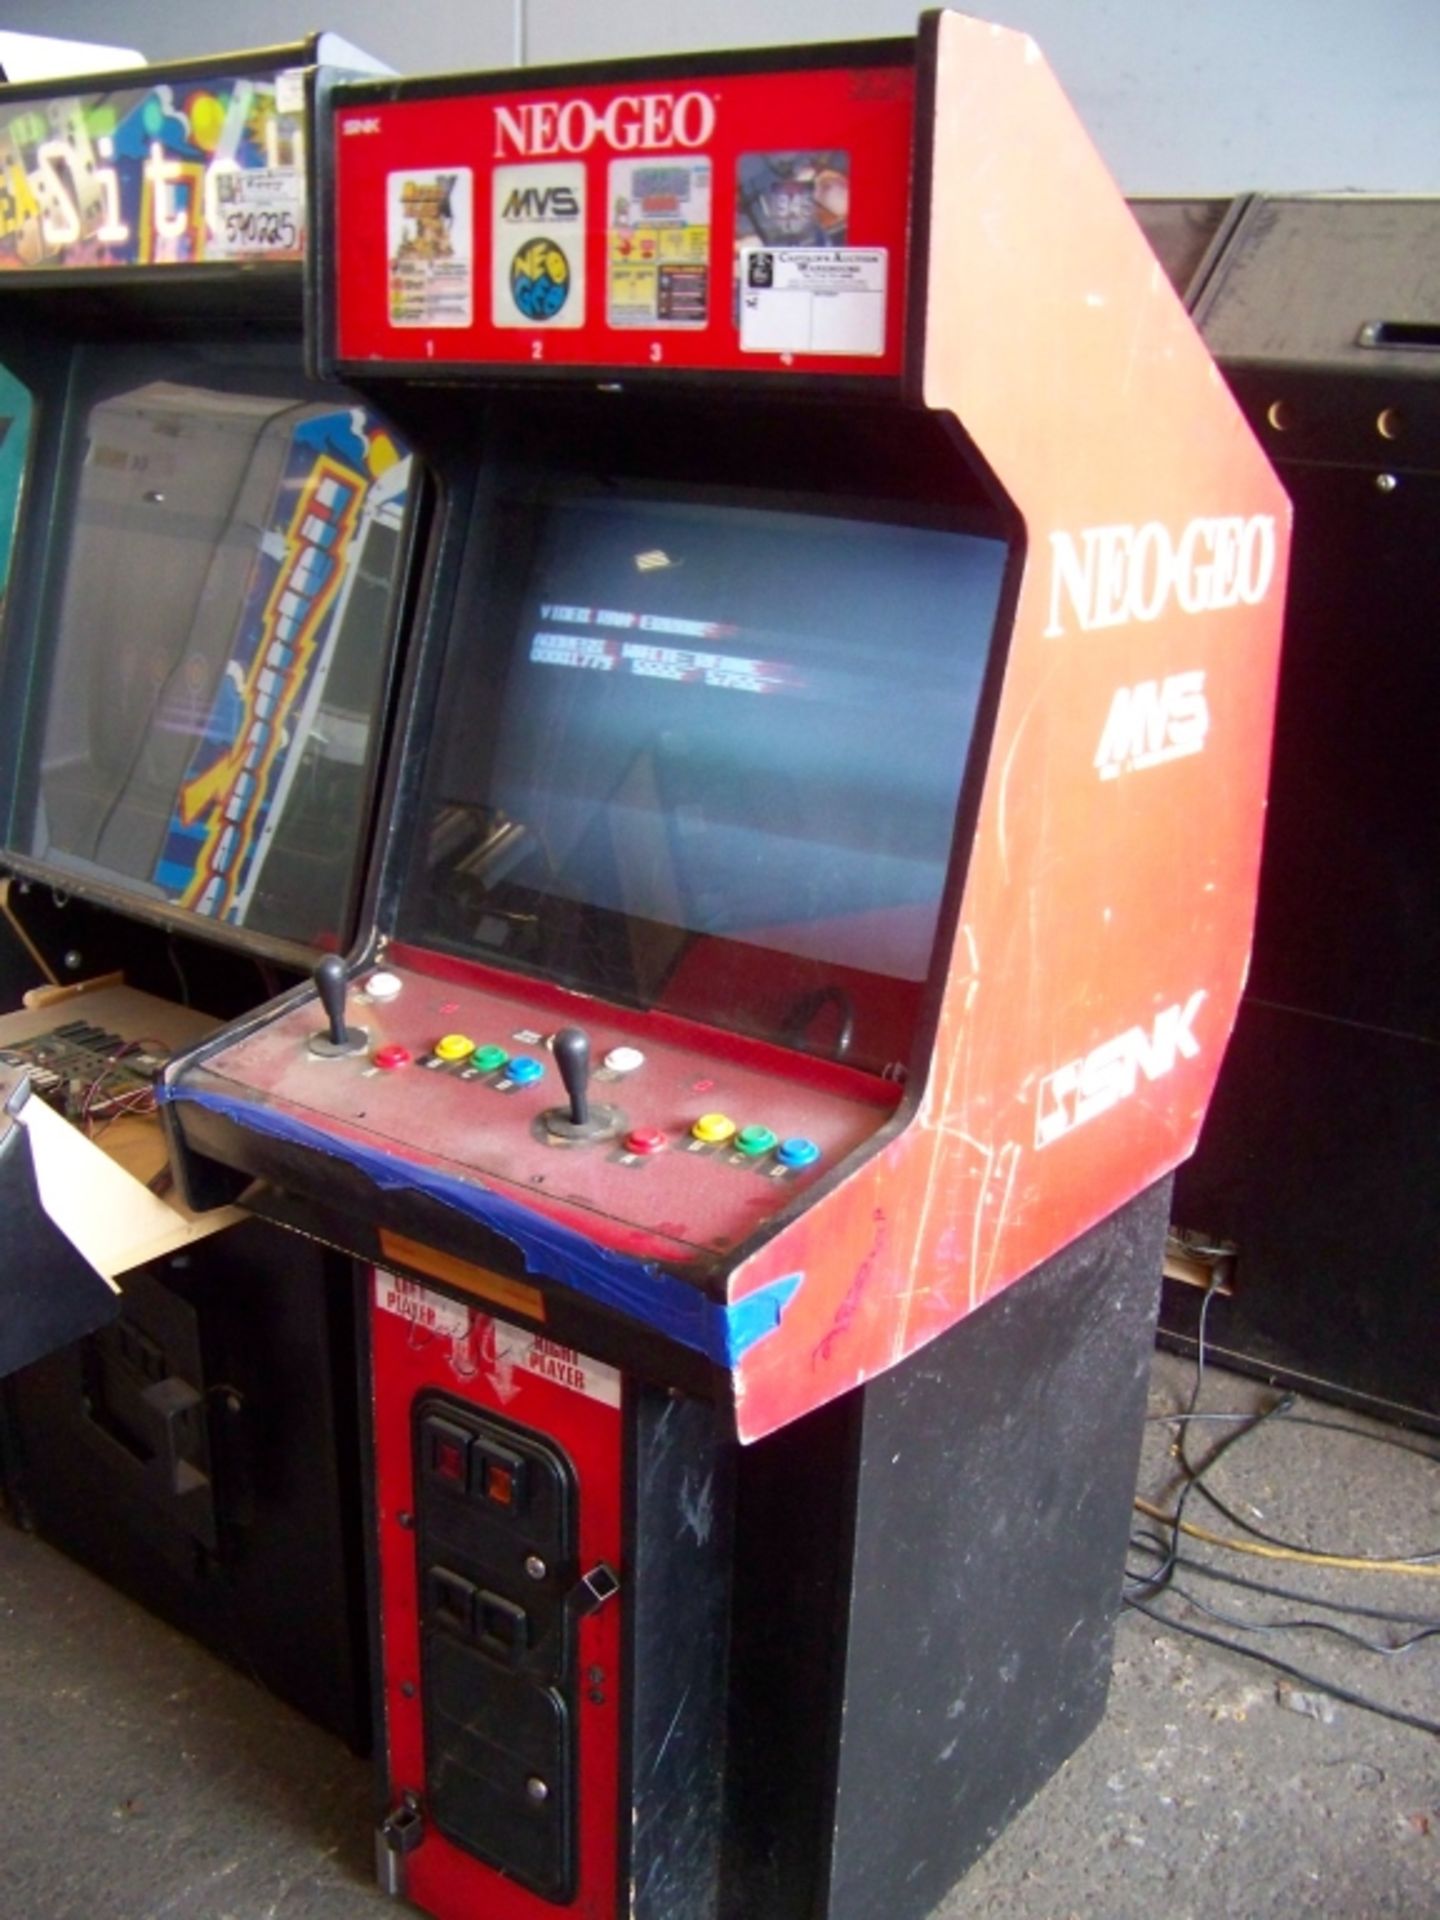 NEO GEO 4 SLOT ARCADE GAME SNK SE Item is in used condition. Evidence of wear and commercial